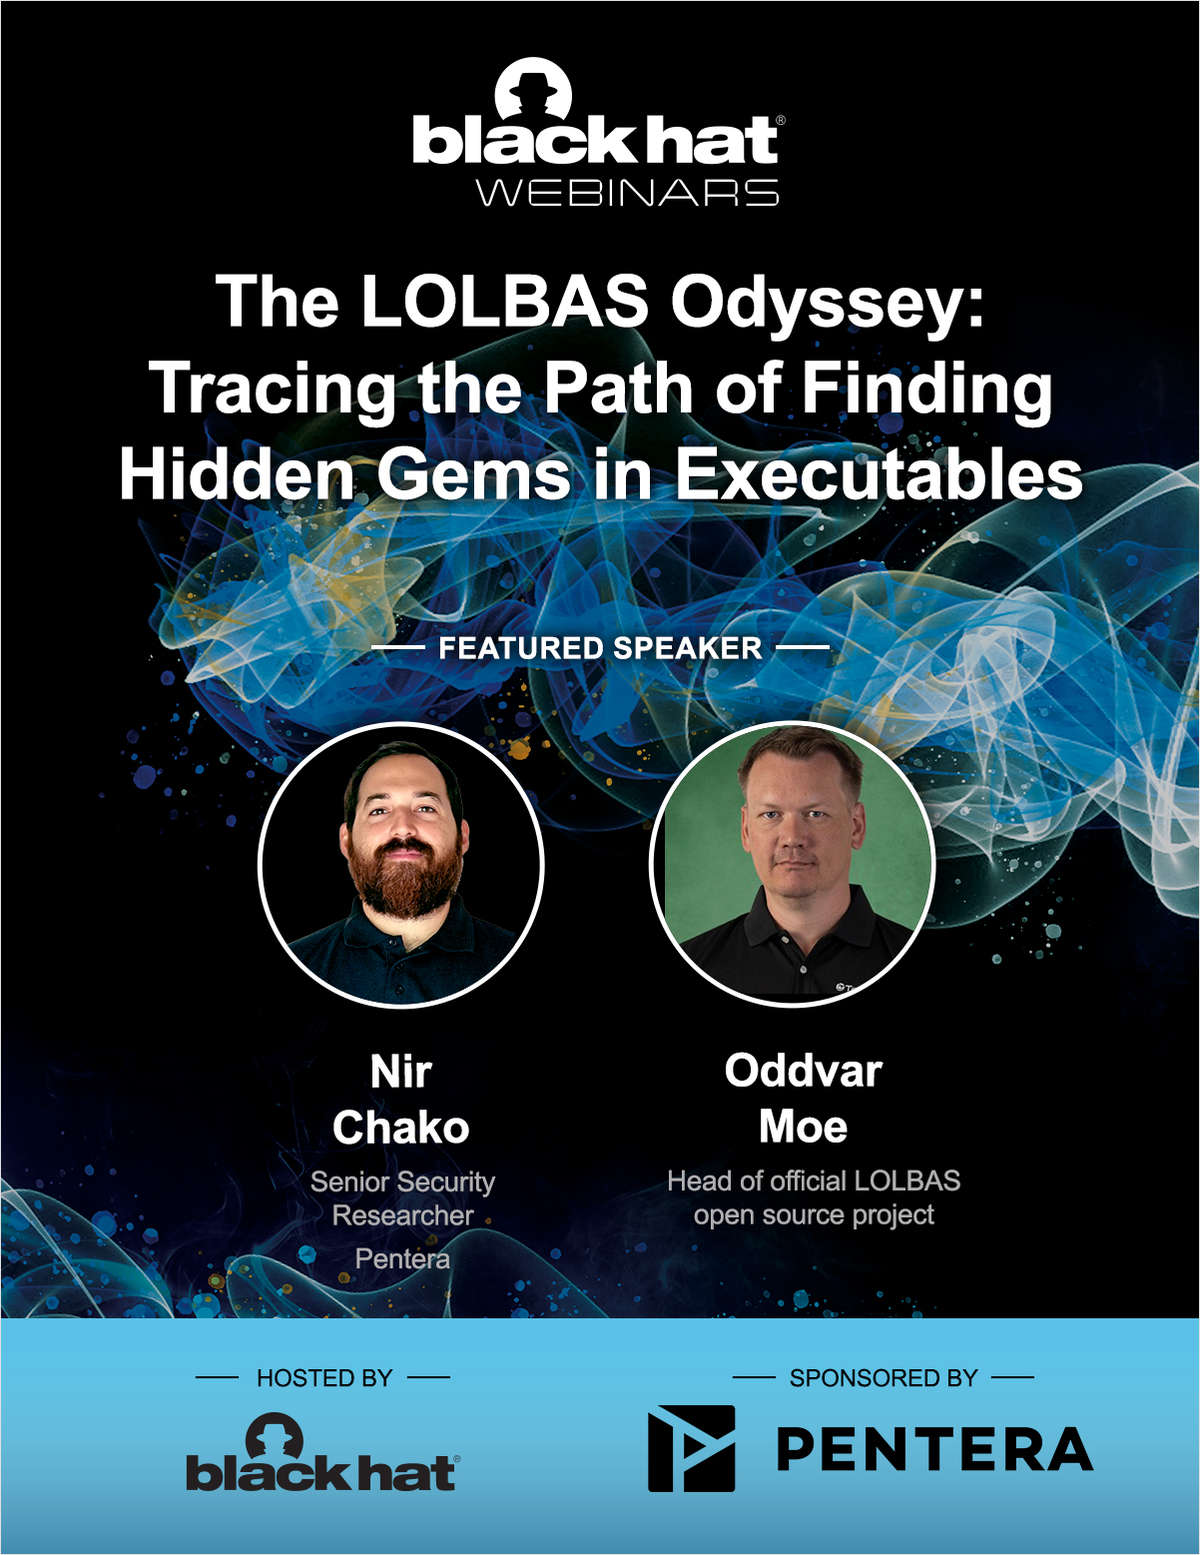 The LOLBAS Odyssey: Tracing the Path of Finding Hidden Gems in Executables